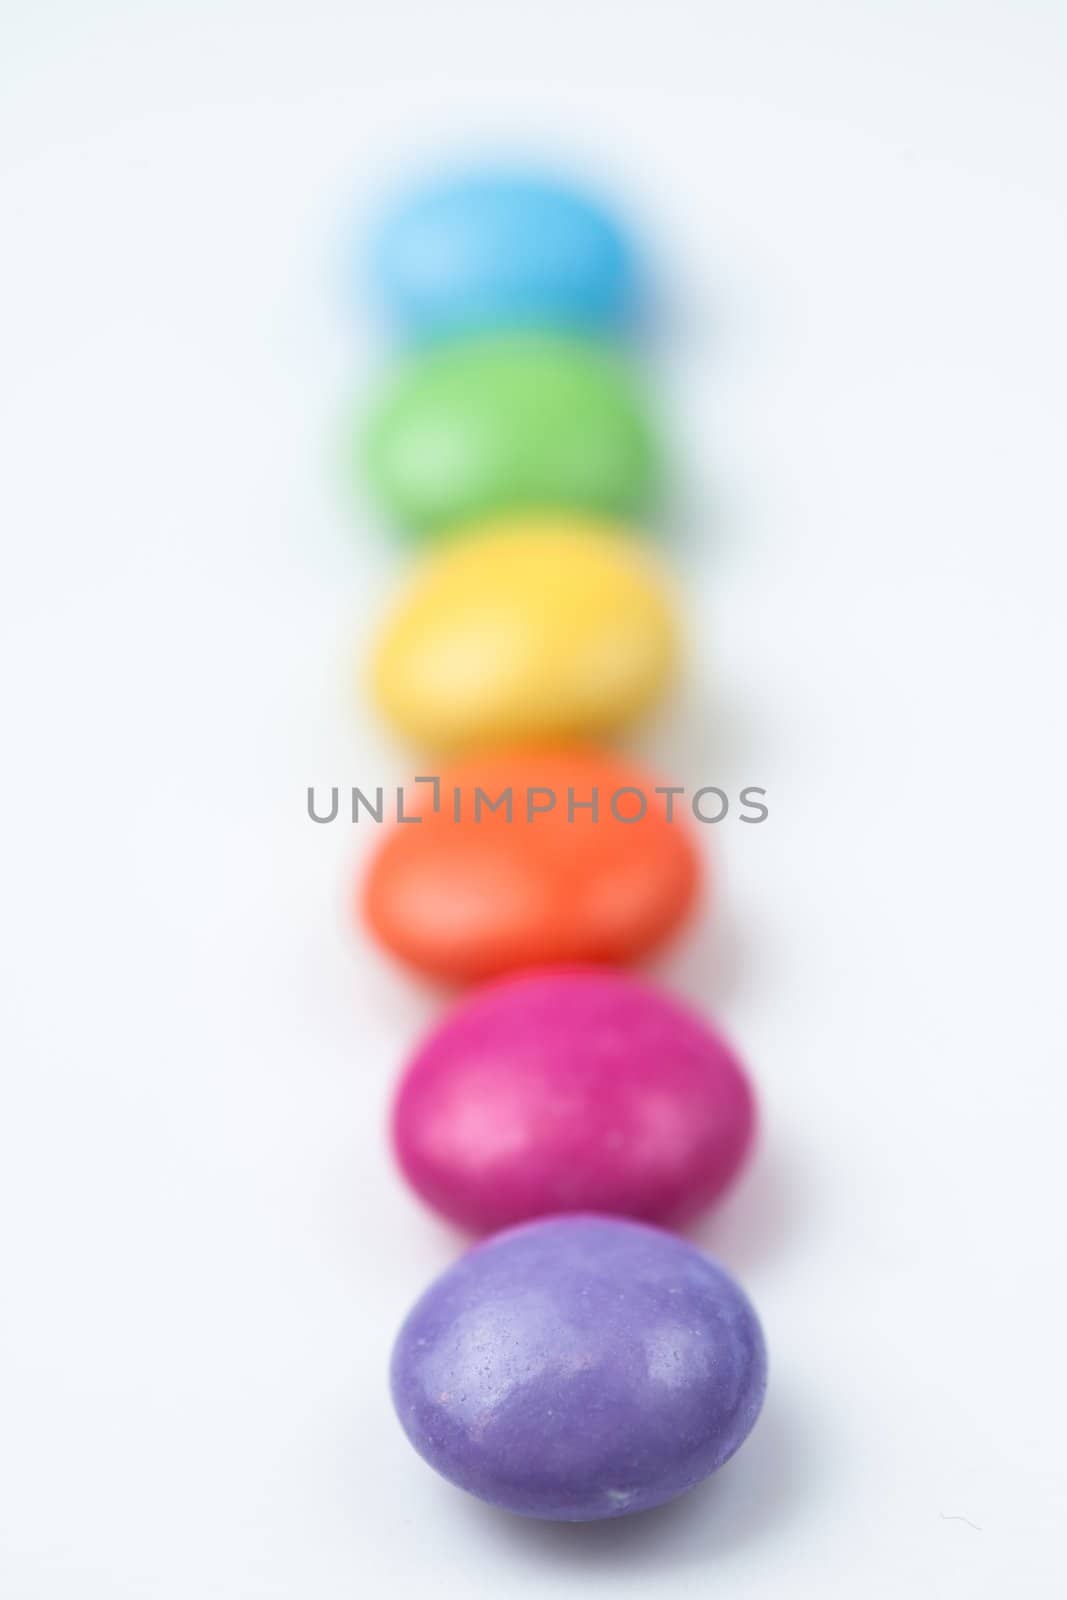 Rank of candies multi coloured against a white background